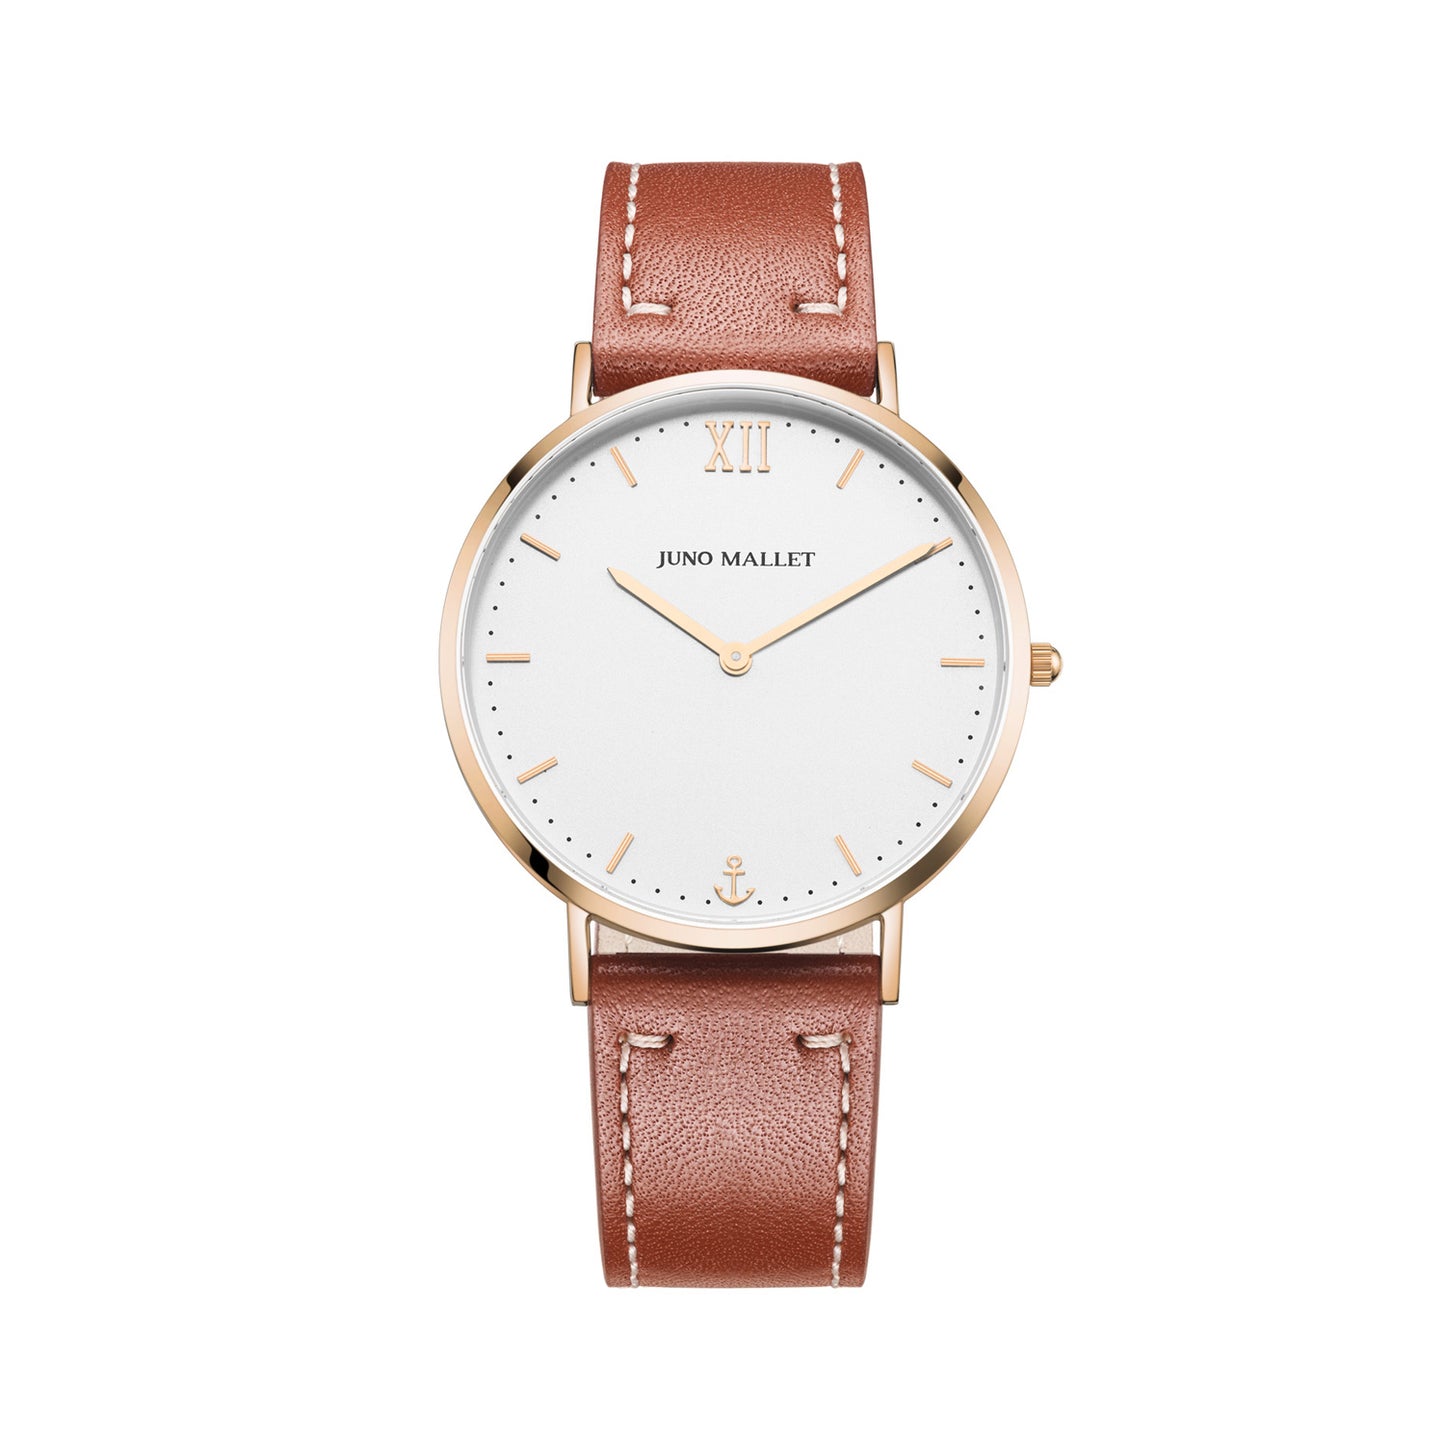 Classic Michelle / Hot Cocoa / Snow White / Rose Gold / 36mm / Women Bracelet Watch